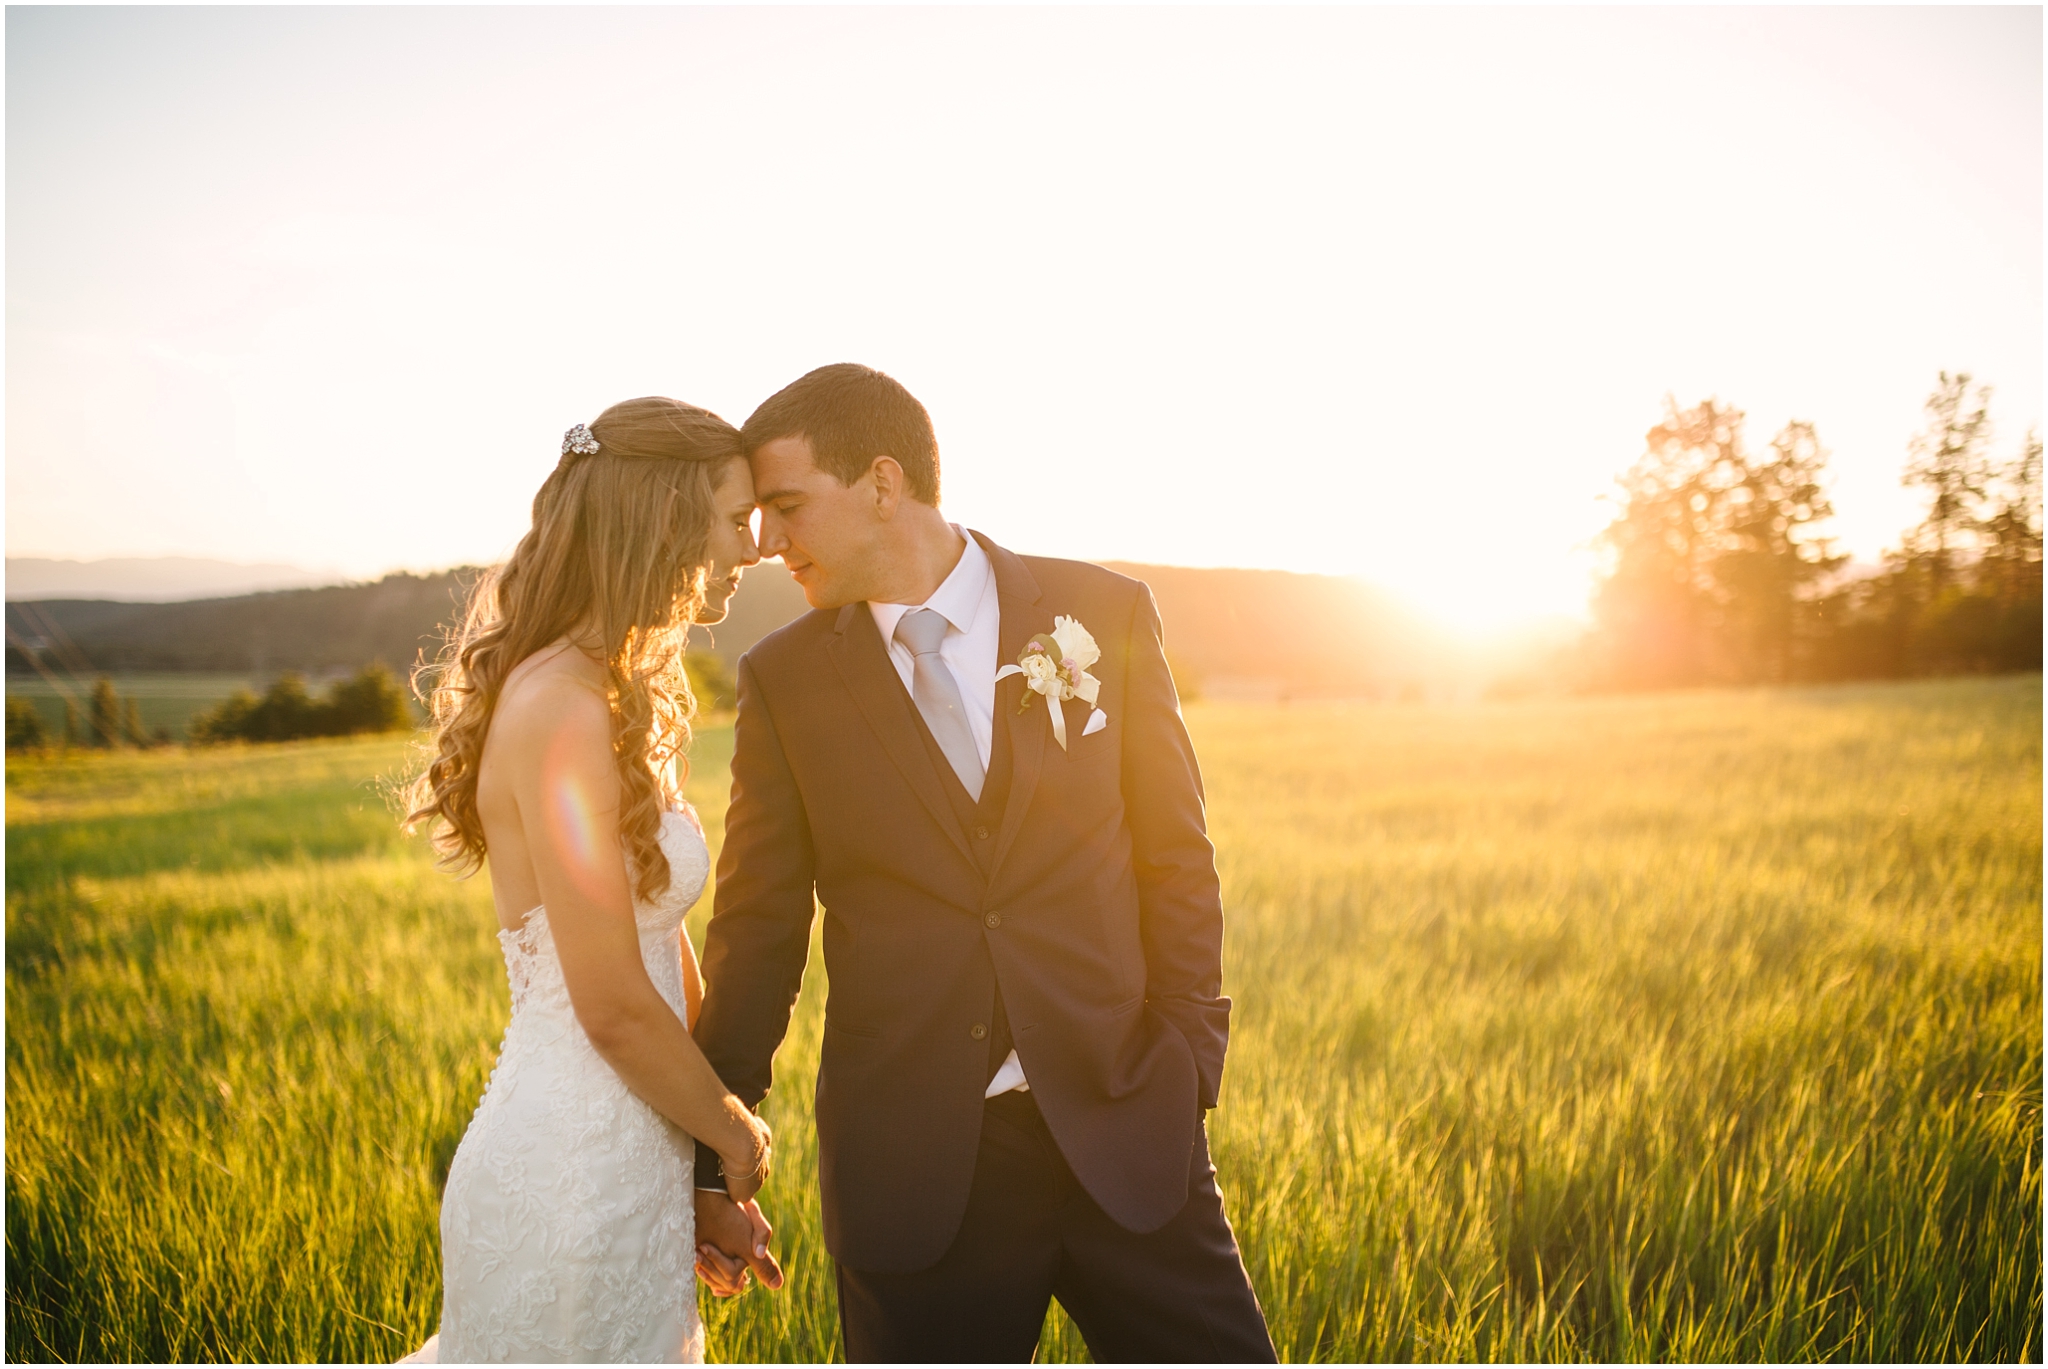 Bride and groom portraits at golden hour at Cle Elum wedding